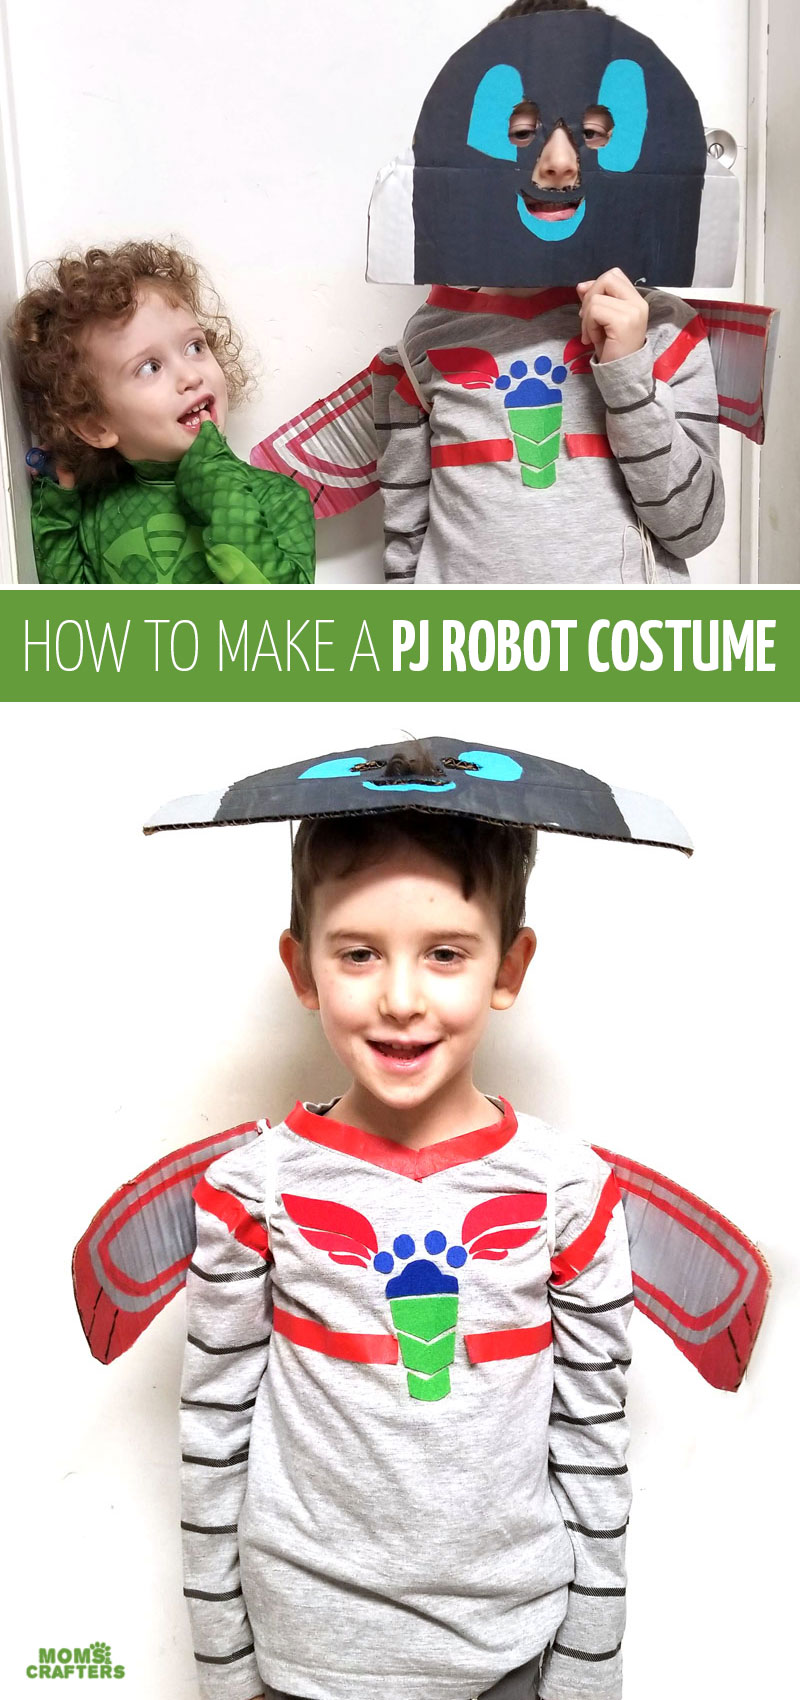 Click to learn how to make a PJ Masks PJ Robot costume - a DIY costume for preschoolers or toddlers! This fun frugal DIY halloween costume and creative idea for boys